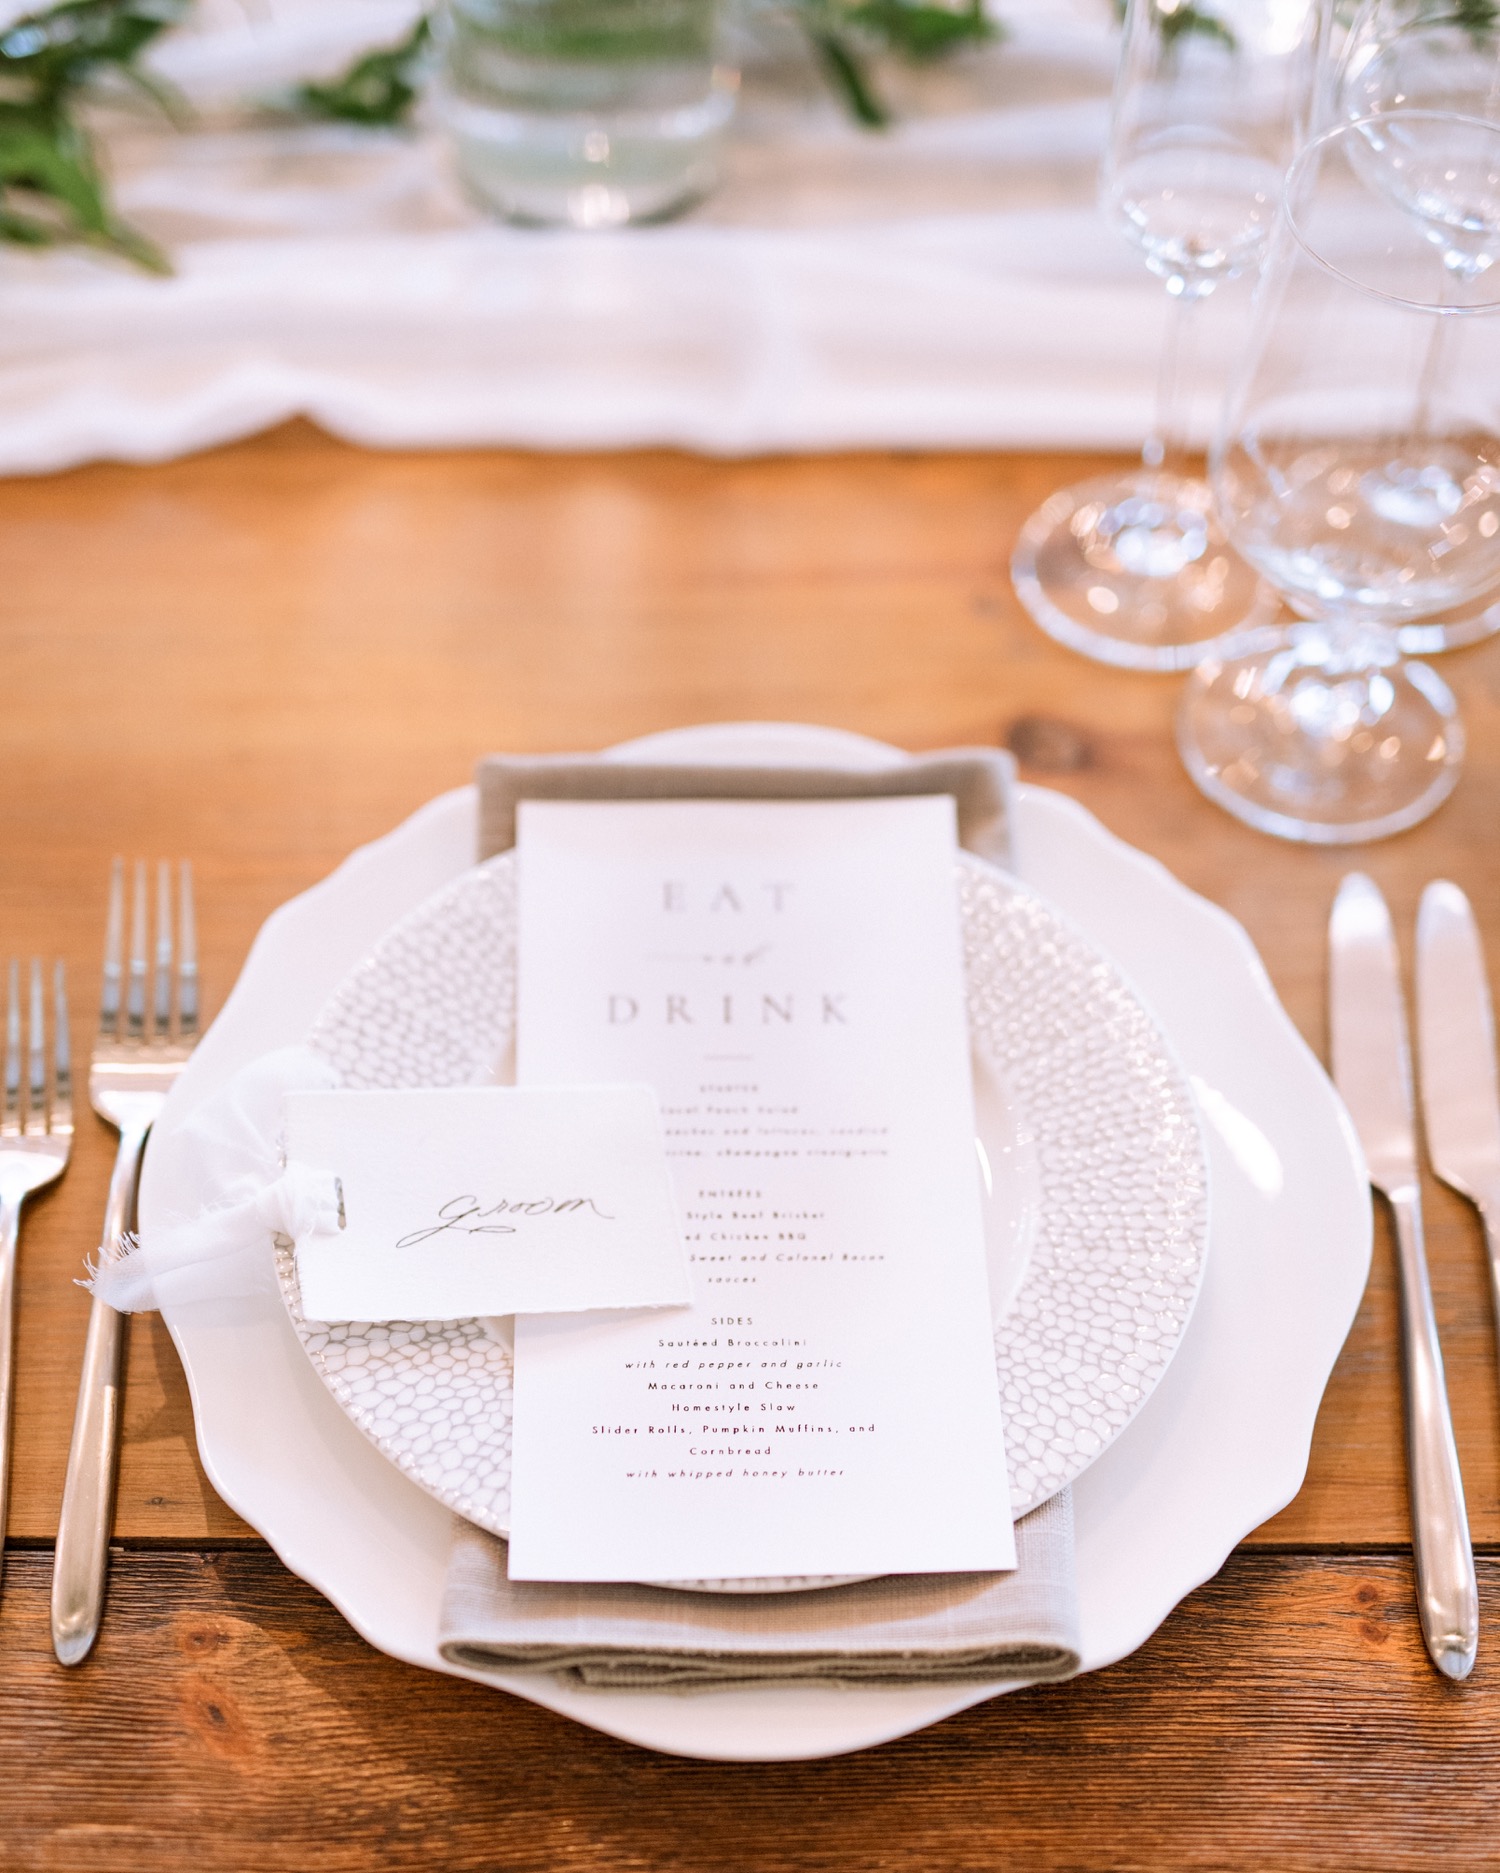 elegant table setting at the King Family Vineyard venue for the Charlottesville wedding reception 